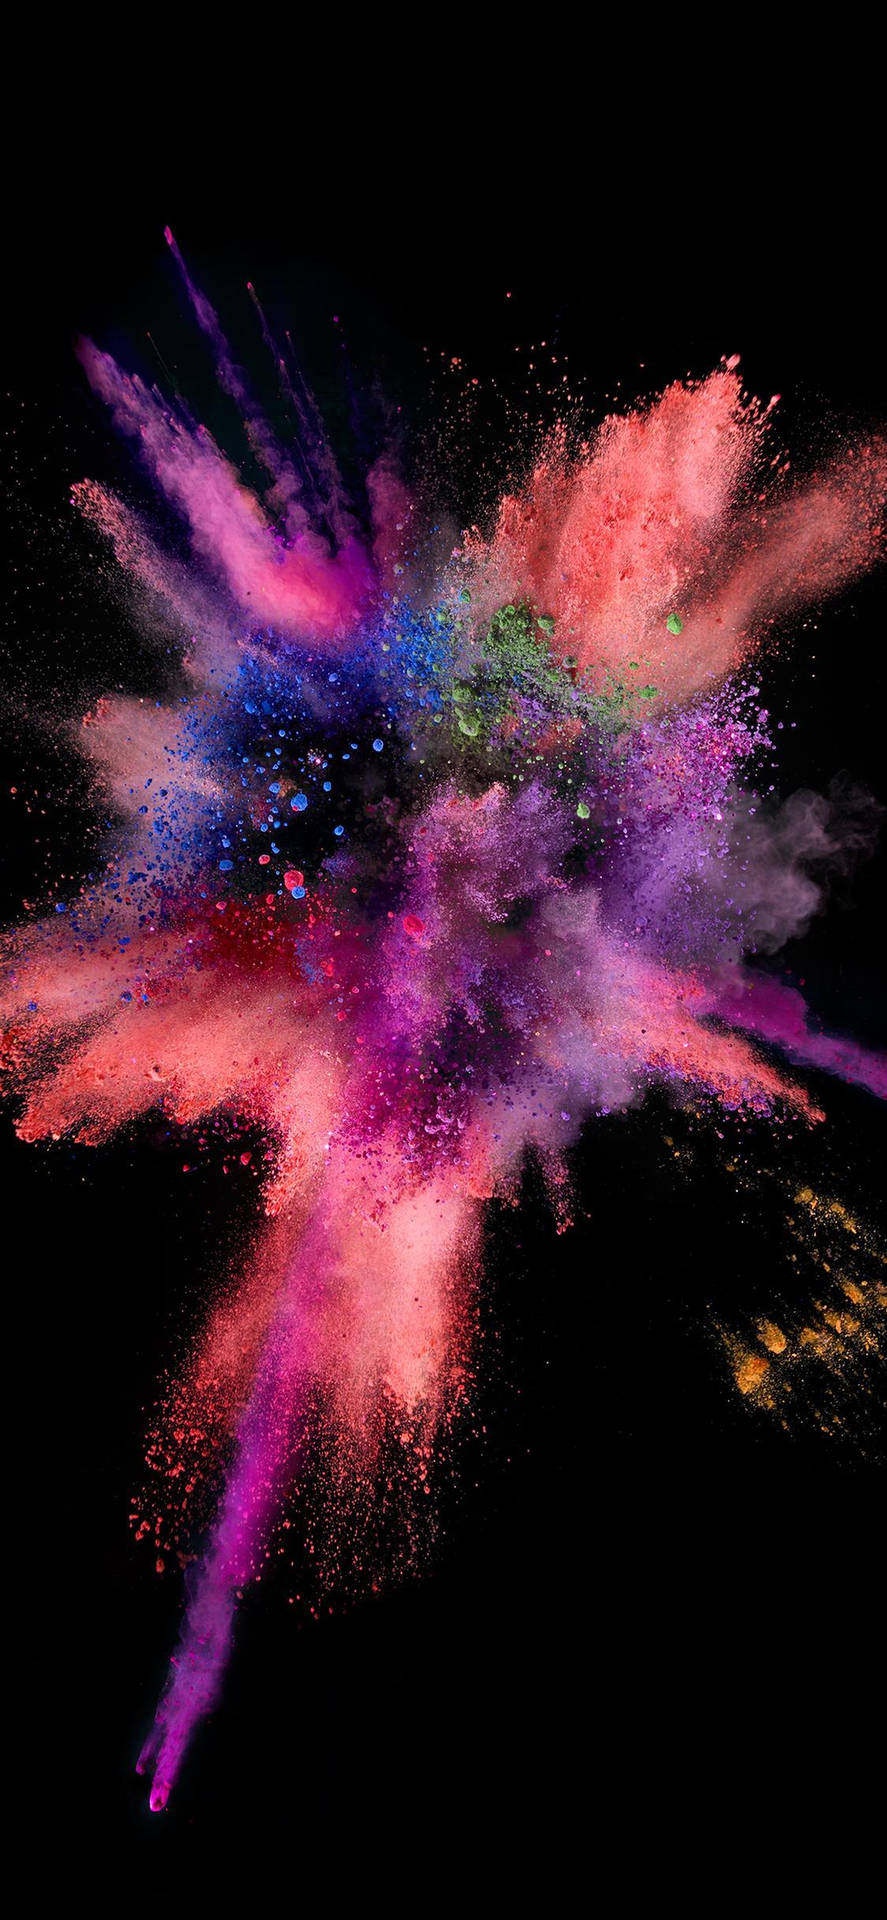 Iphone X Original Colorful Dust Explosion Background